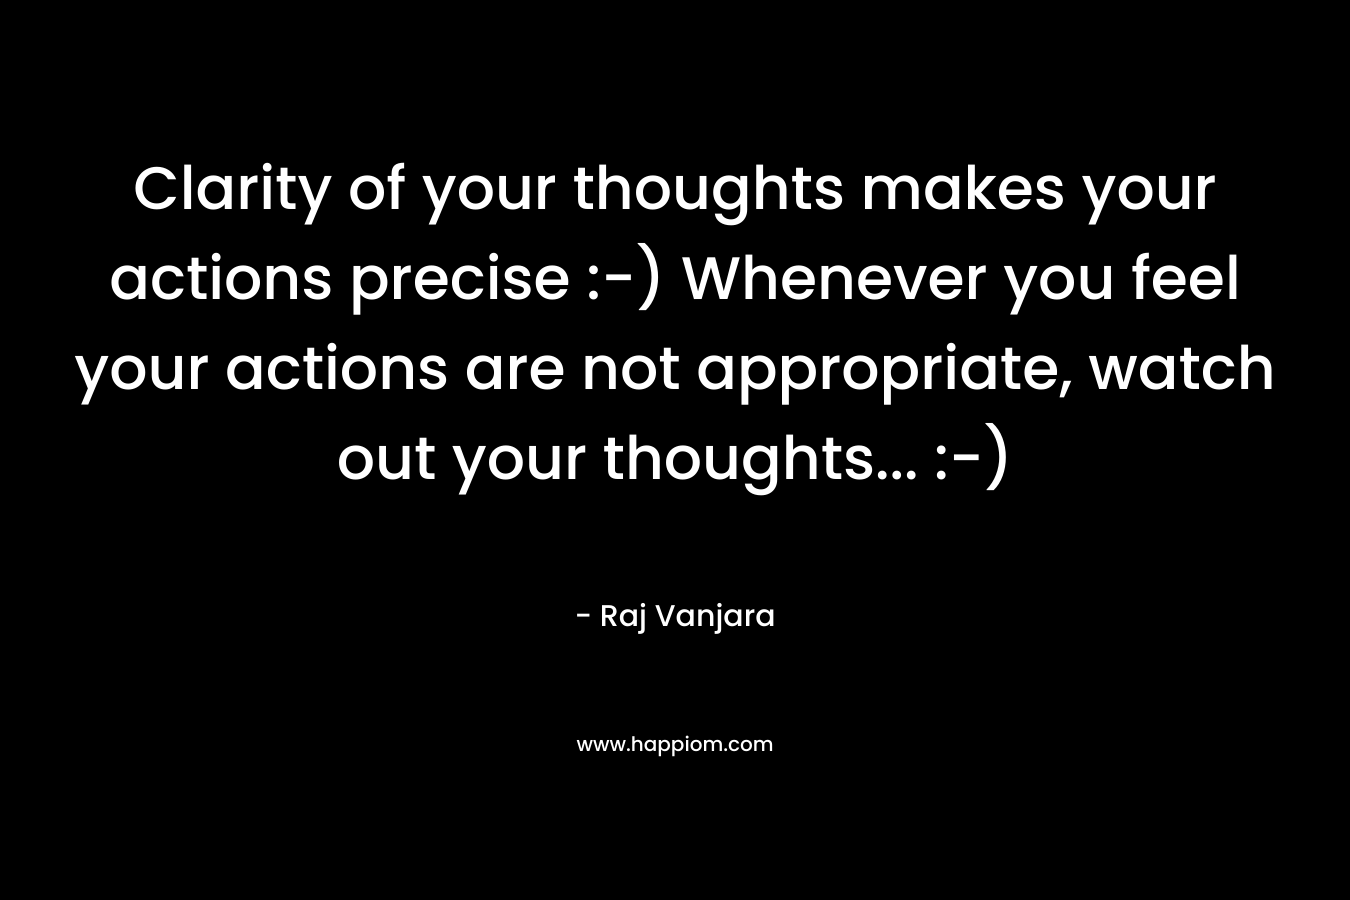 Clarity of your thoughts makes your actions precise :-) Whenever you feel your actions are not appropriate, watch out your thoughts... :-)